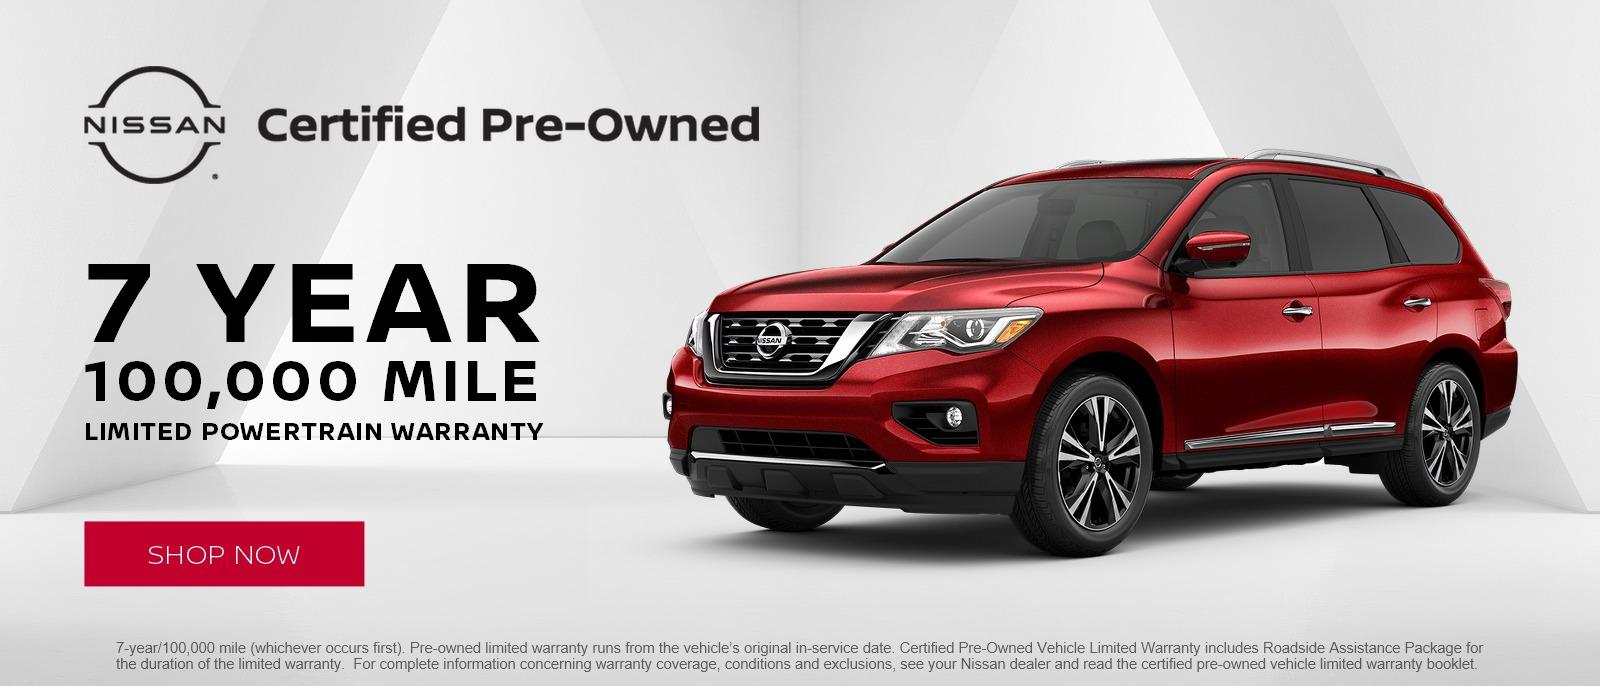 NISSAN Certified Pre-Owned
7 Year / 100,000 Mile Limited Powertrain Warranty
Shop Now